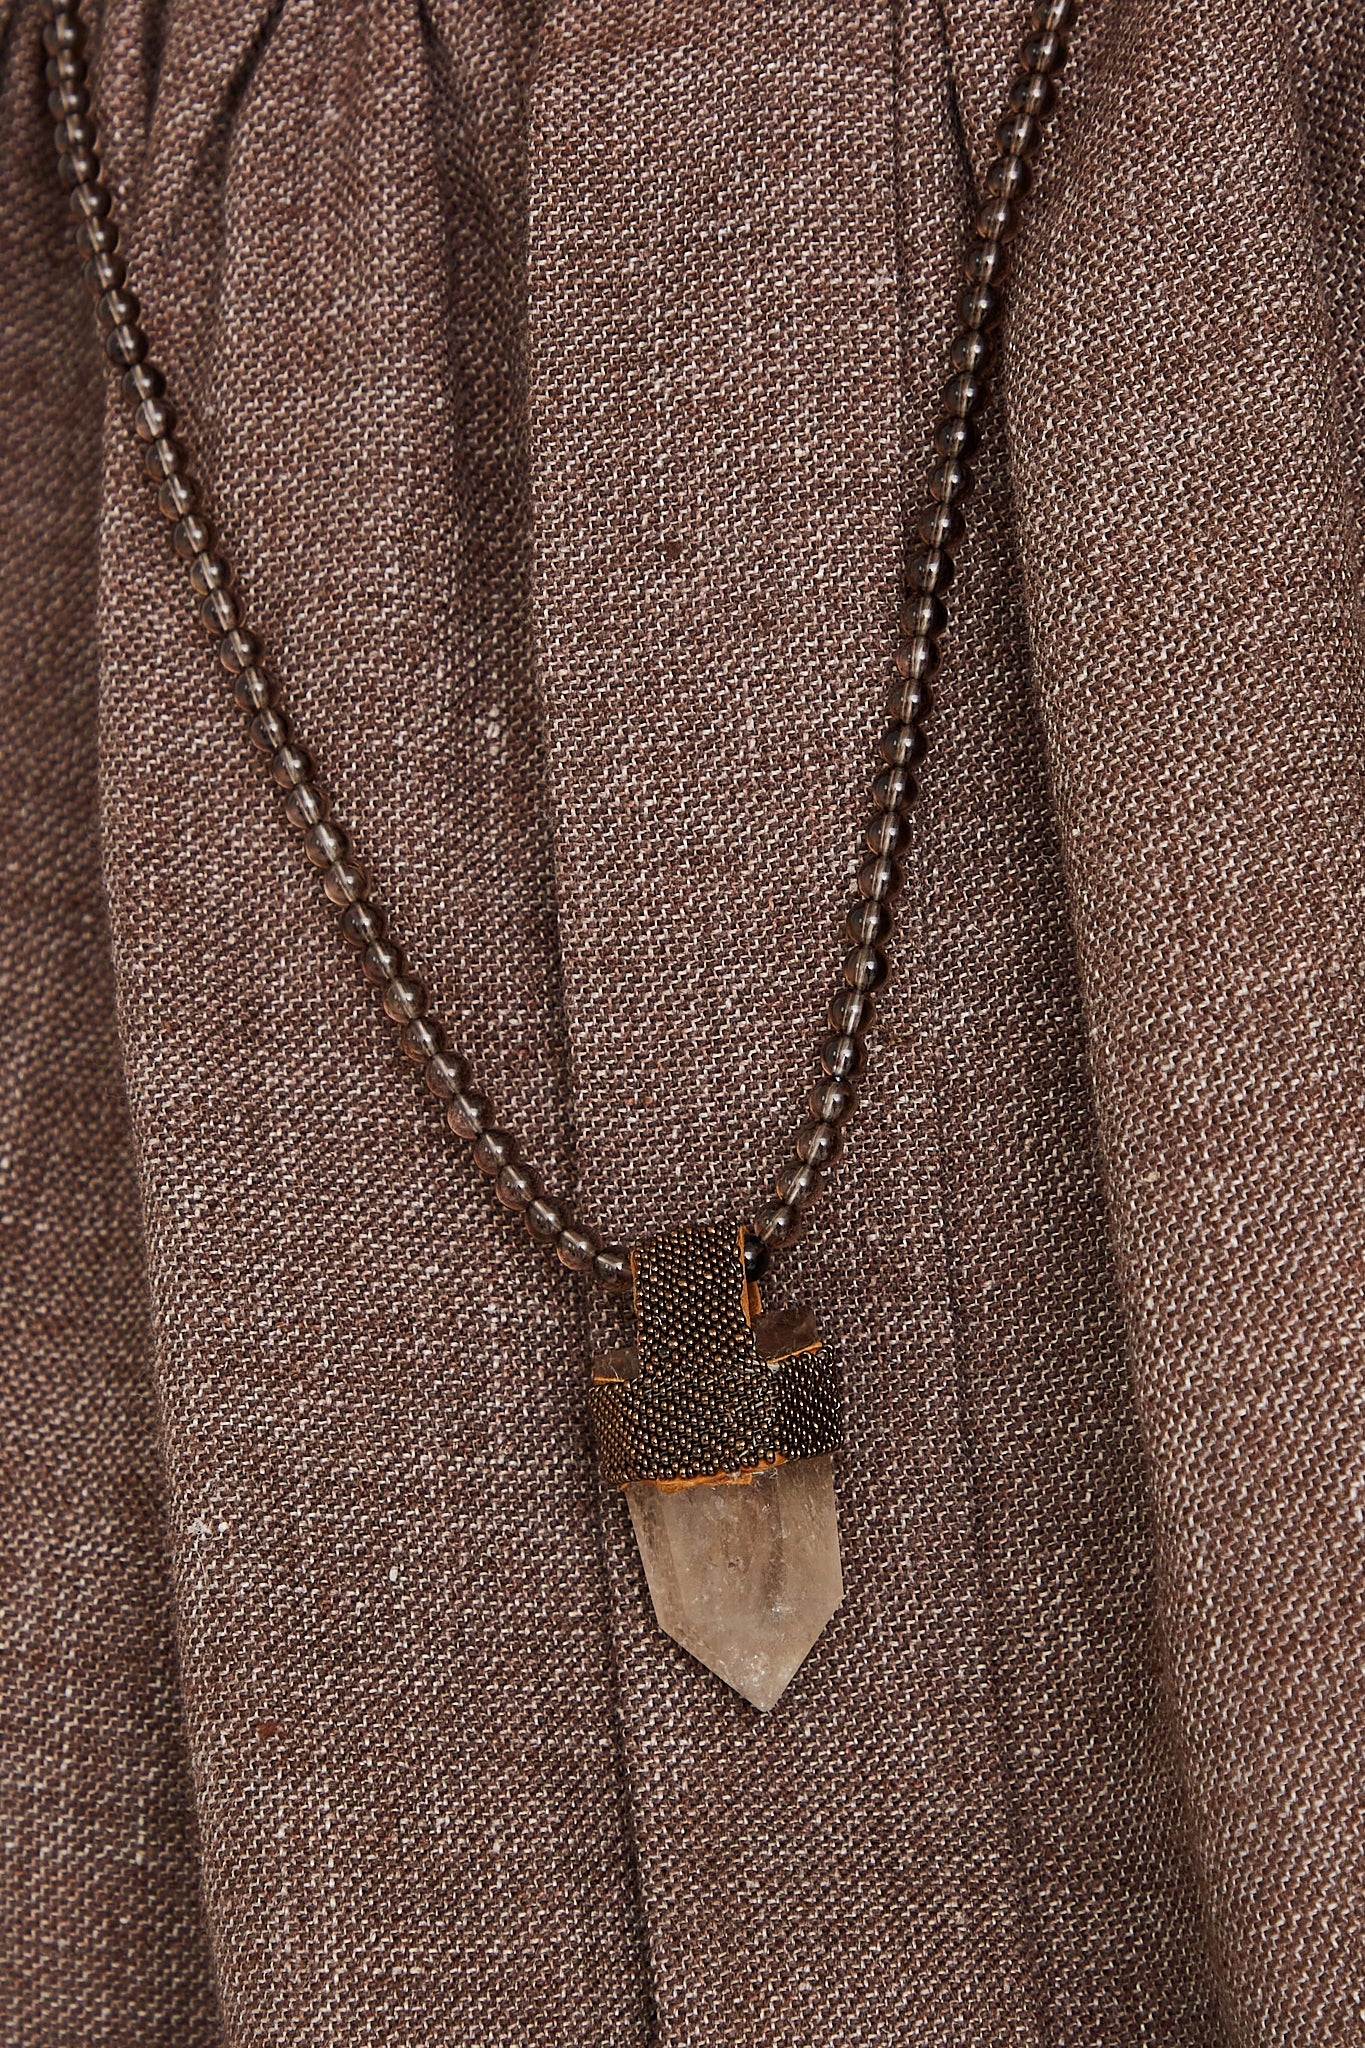 A Long Pendulum Necklace in Smoky Quartz Beads Brown, Citrine Crystal by Robin Mollicone.